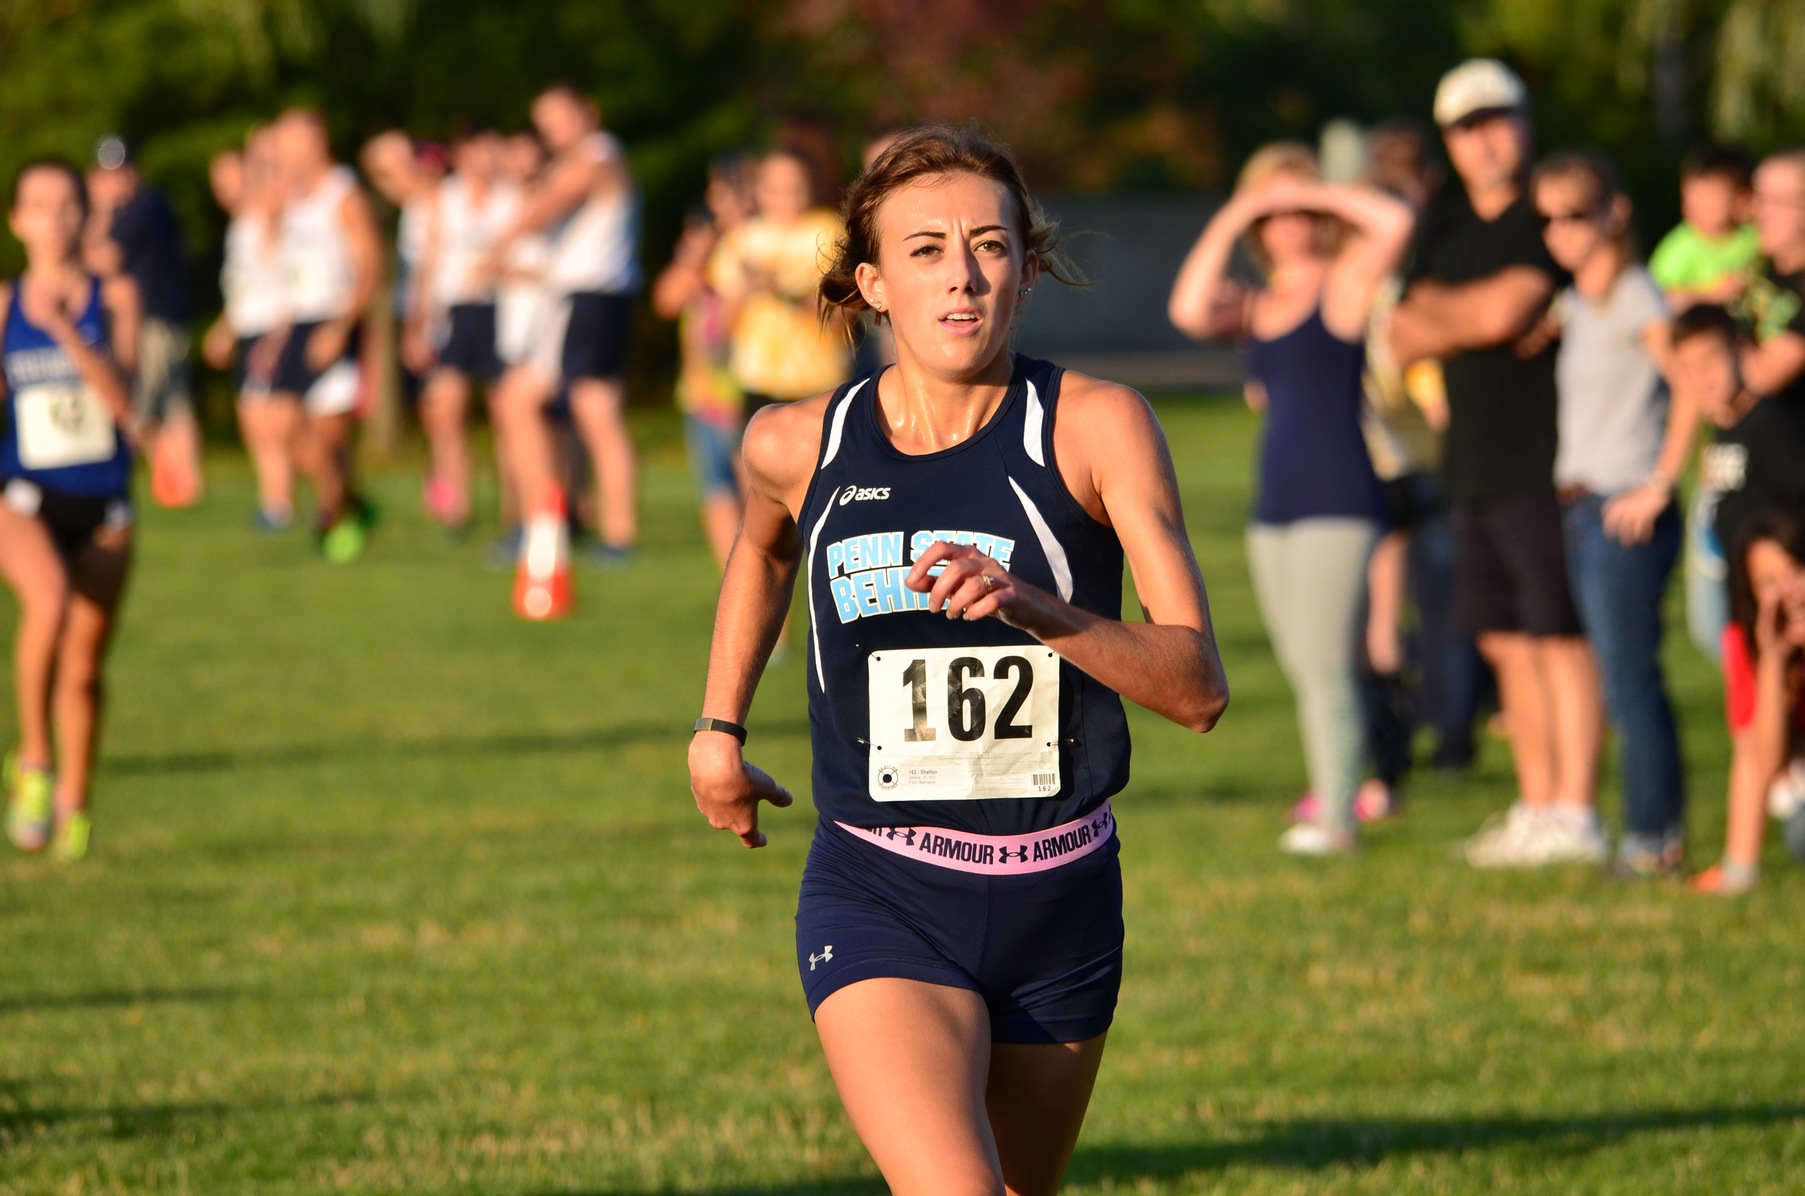 Women's Cross Country Place Sixth at Houghton